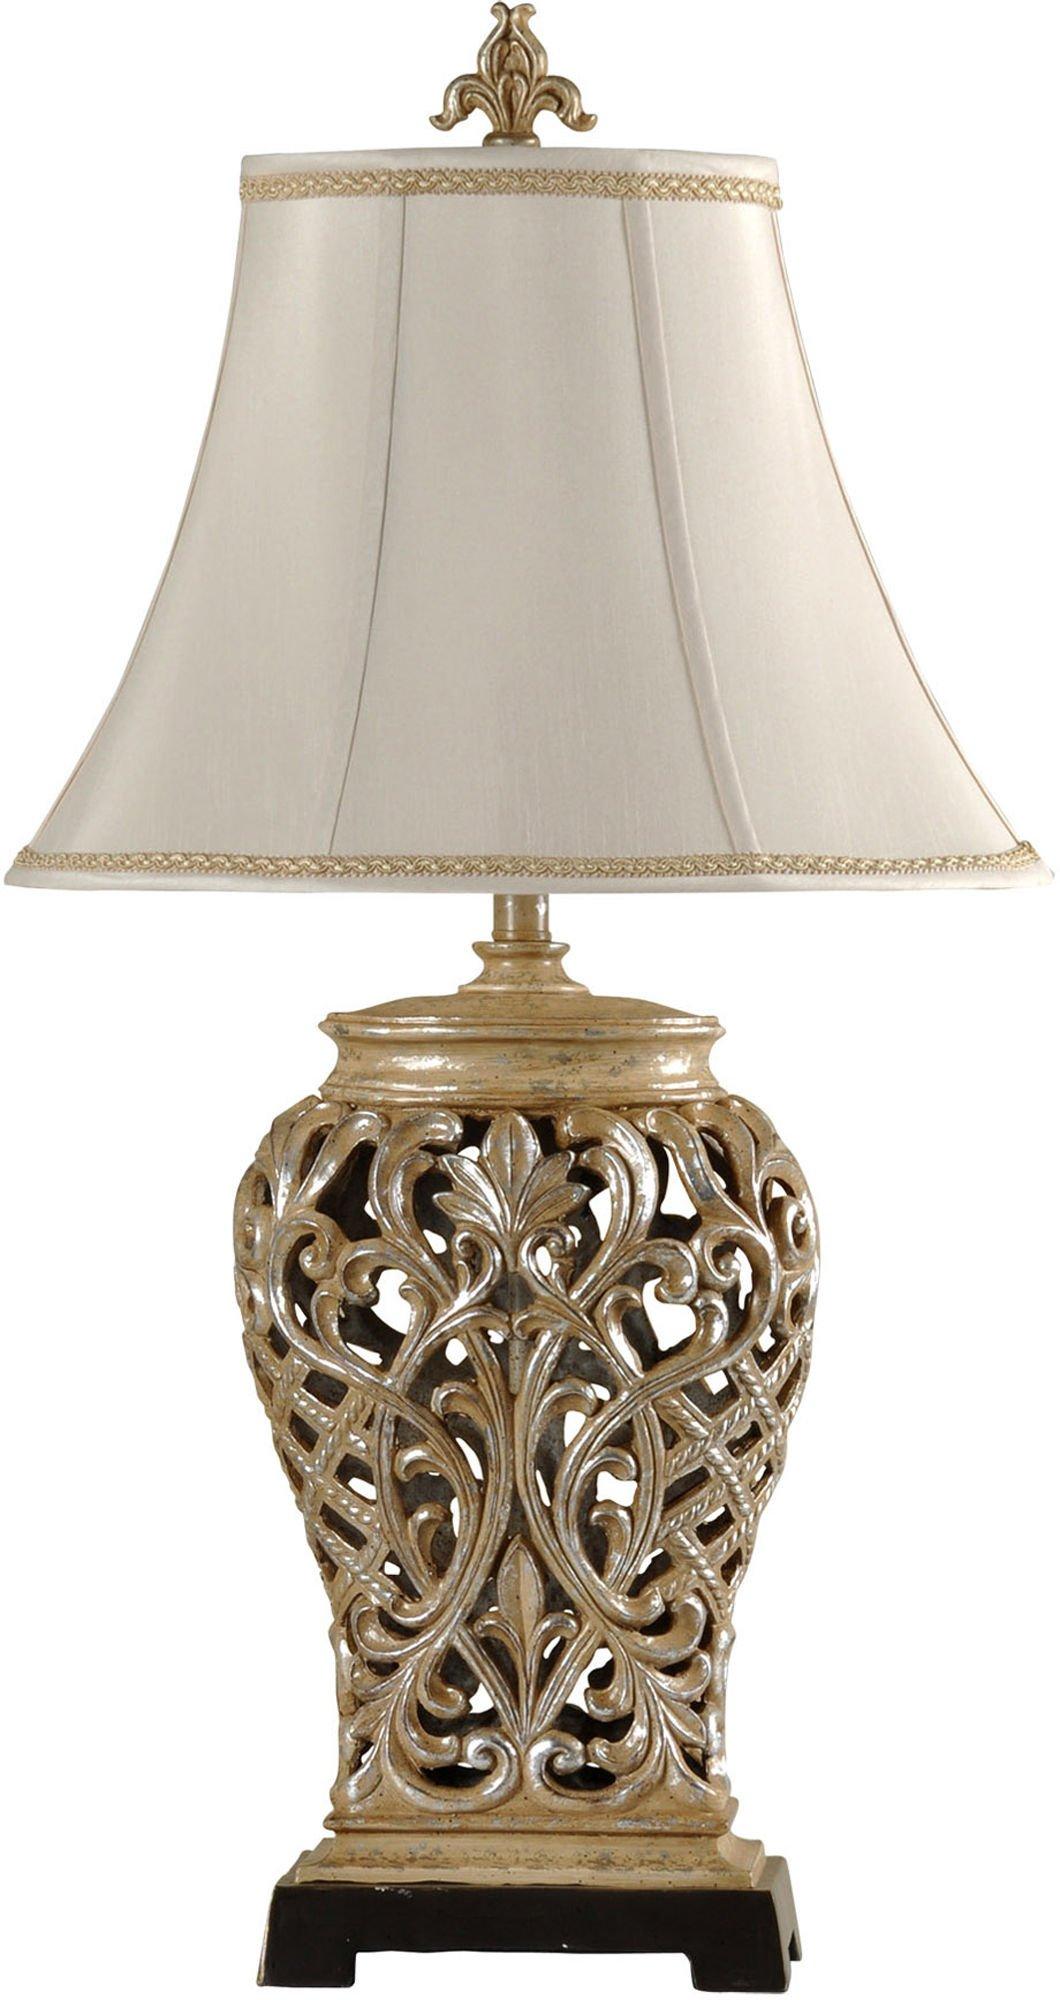 Lacey Scroll Table Lamp